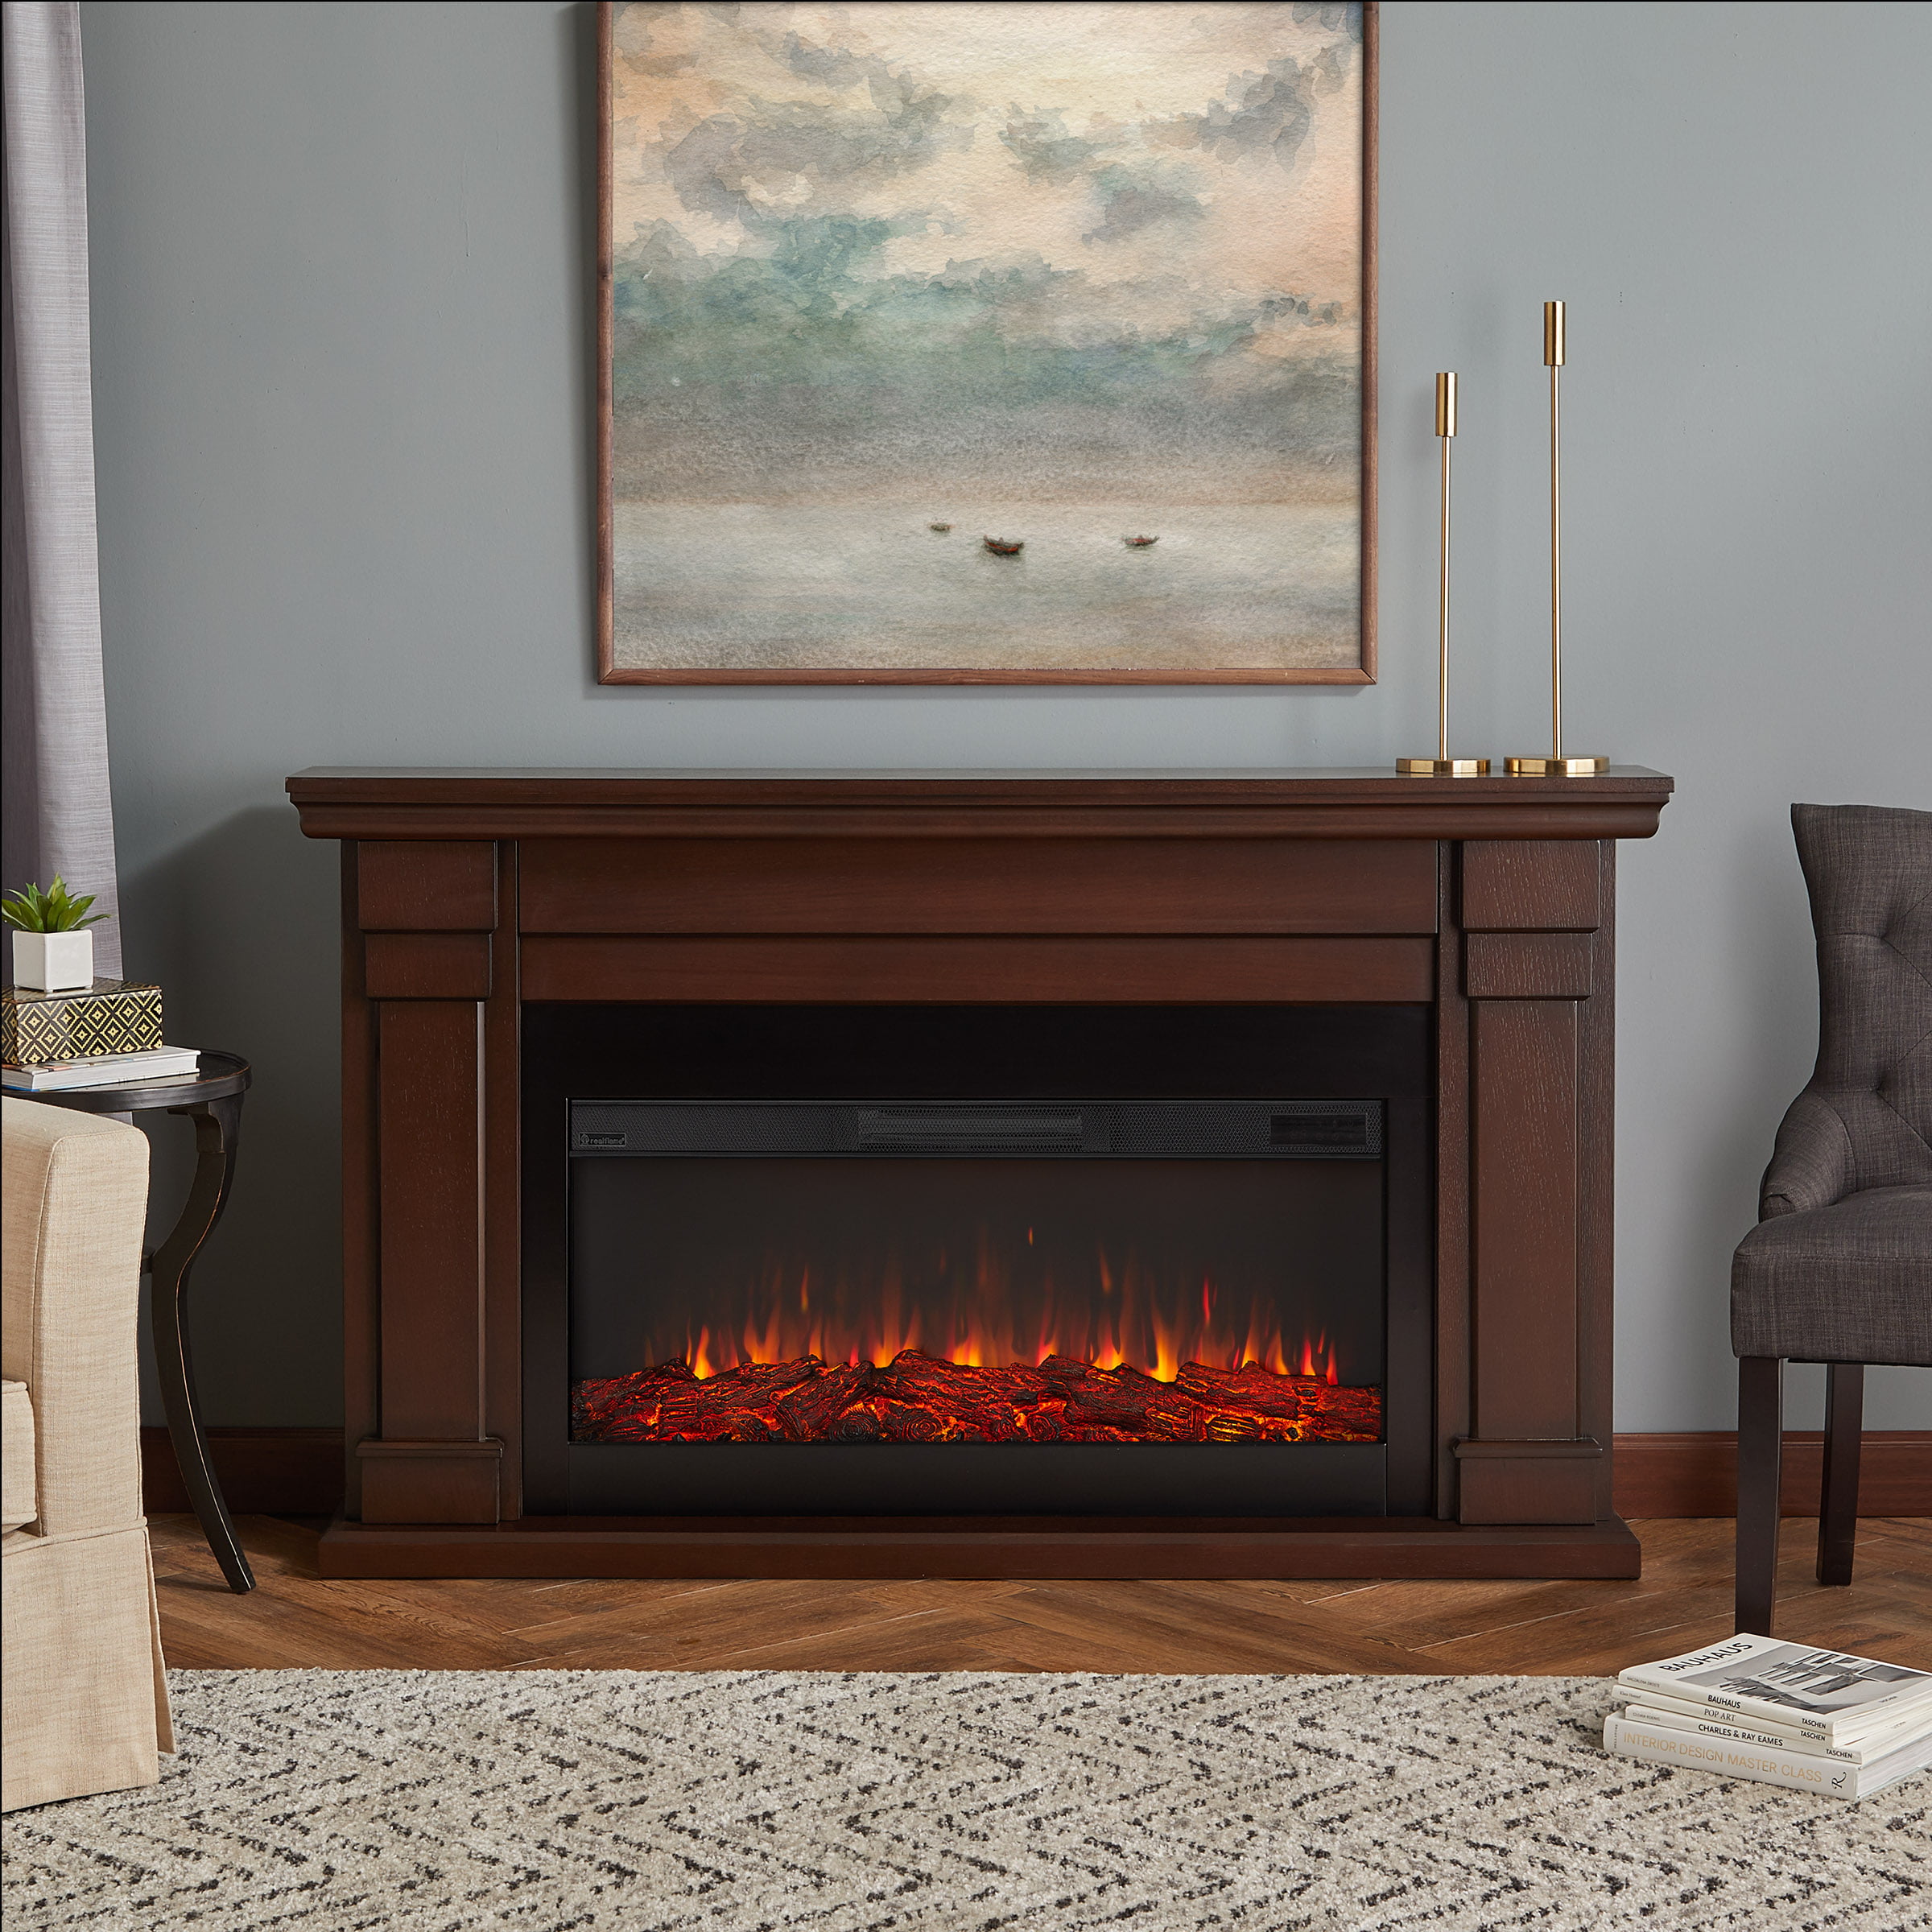 Carlisle Electric Fireplace In Chestnut, Does An Electric Fireplace Have A Real Flame